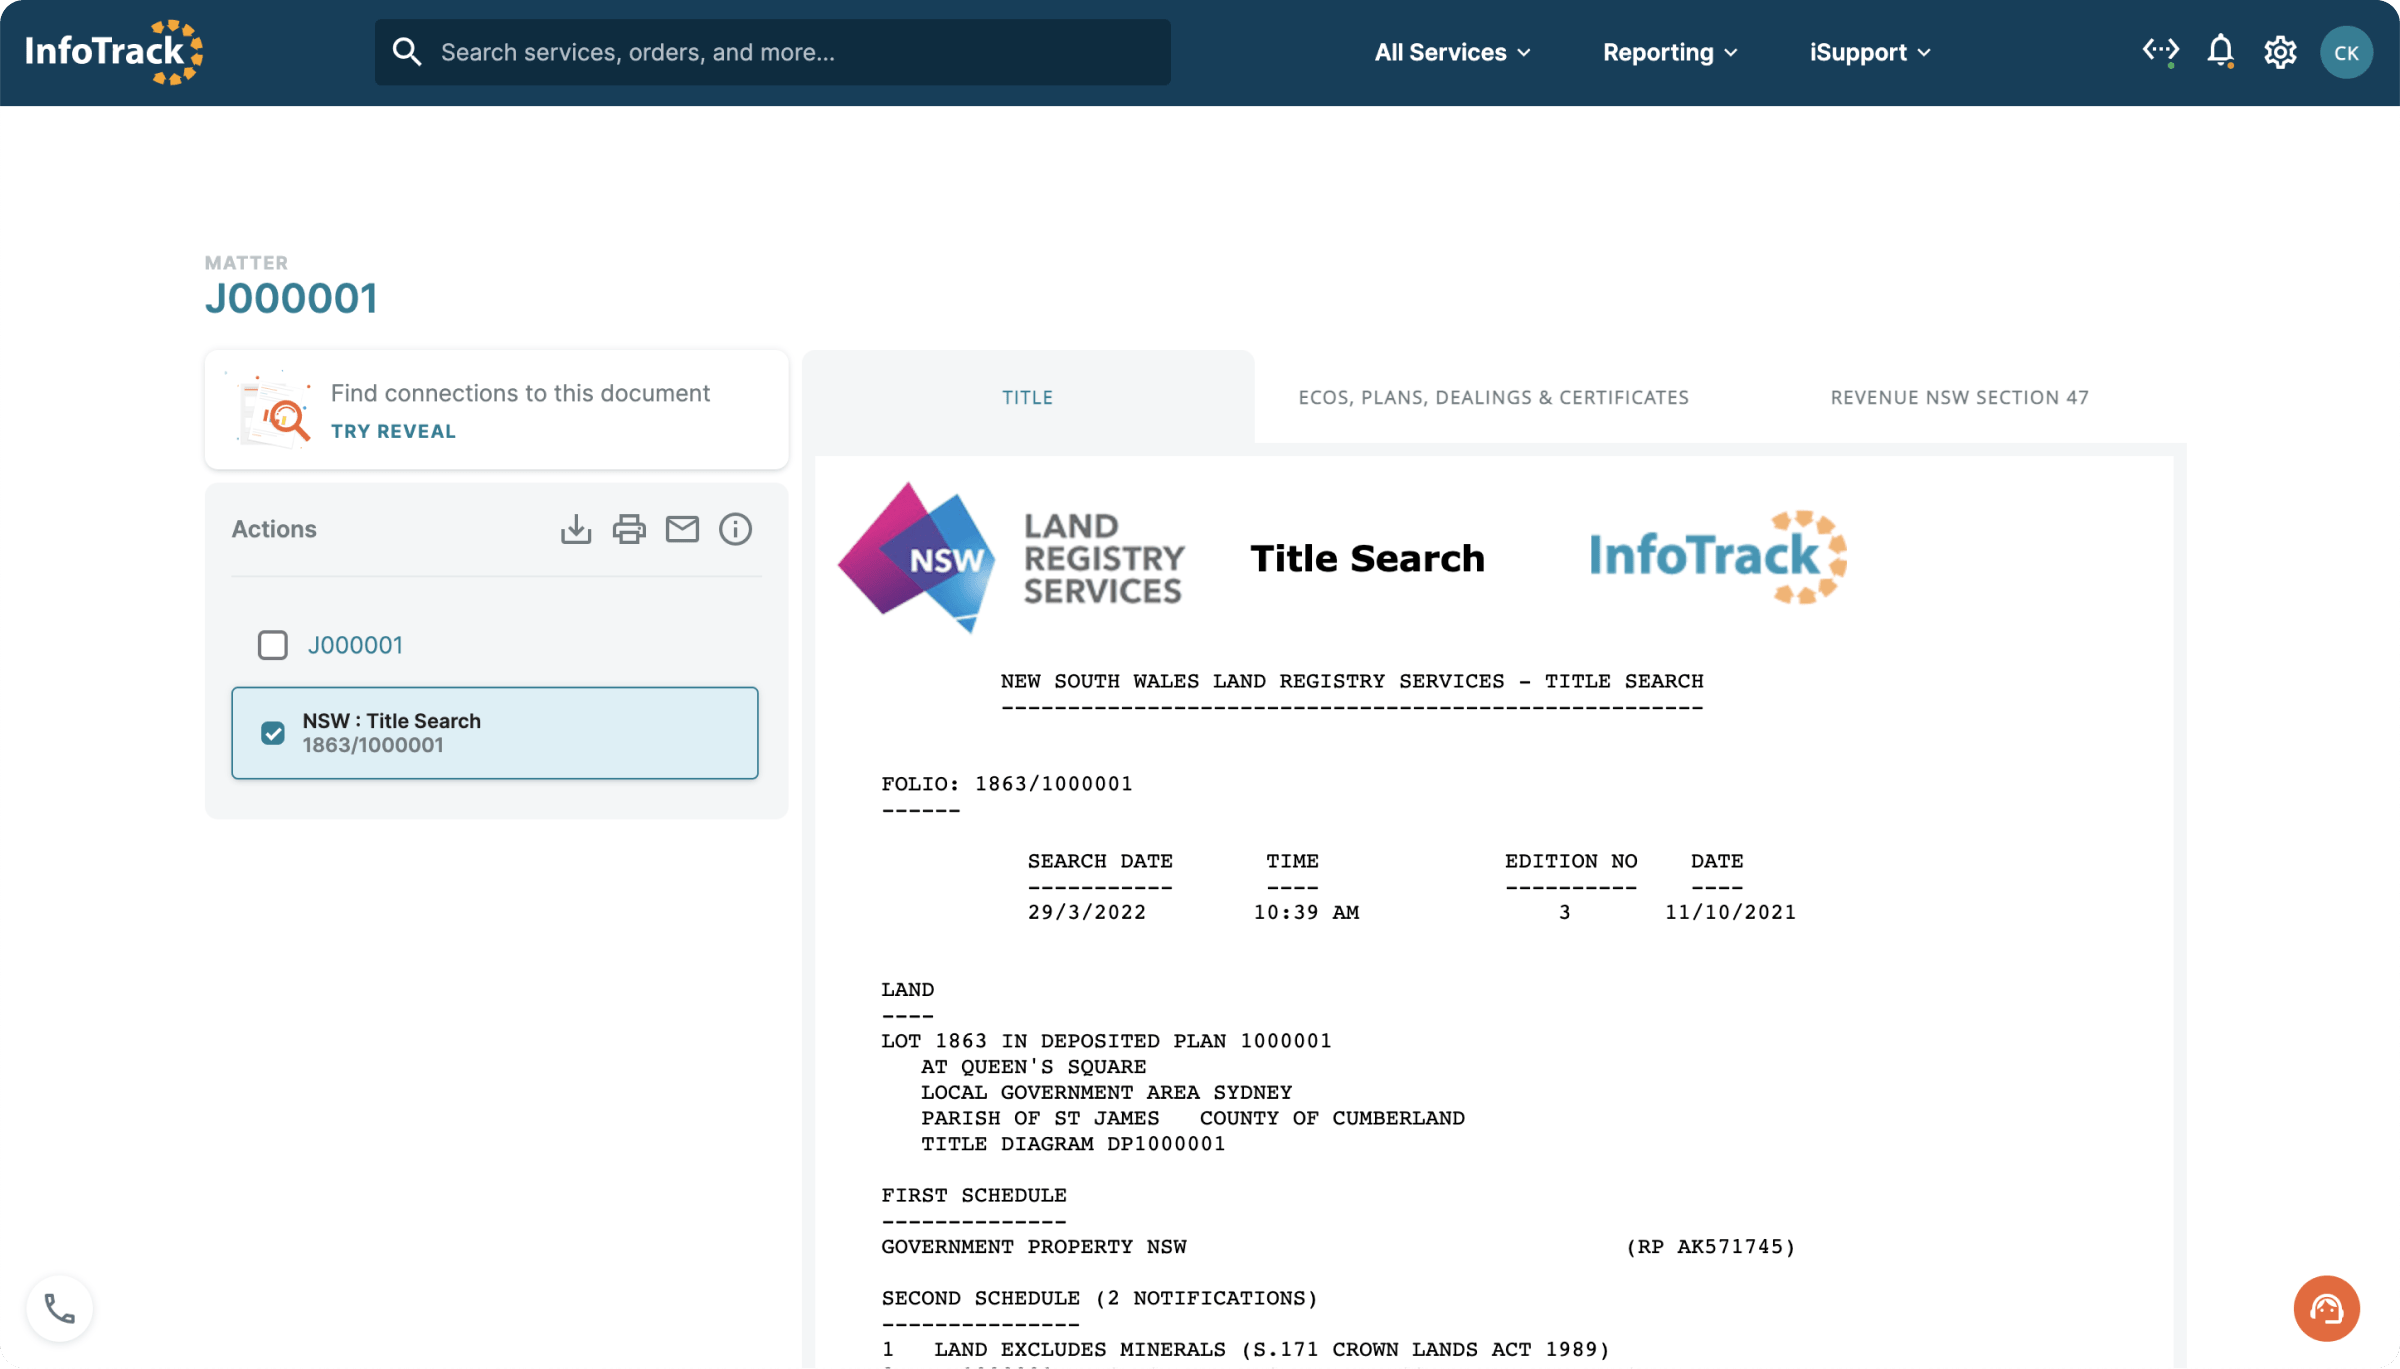 You'll see the completed search results in InfoTrack.